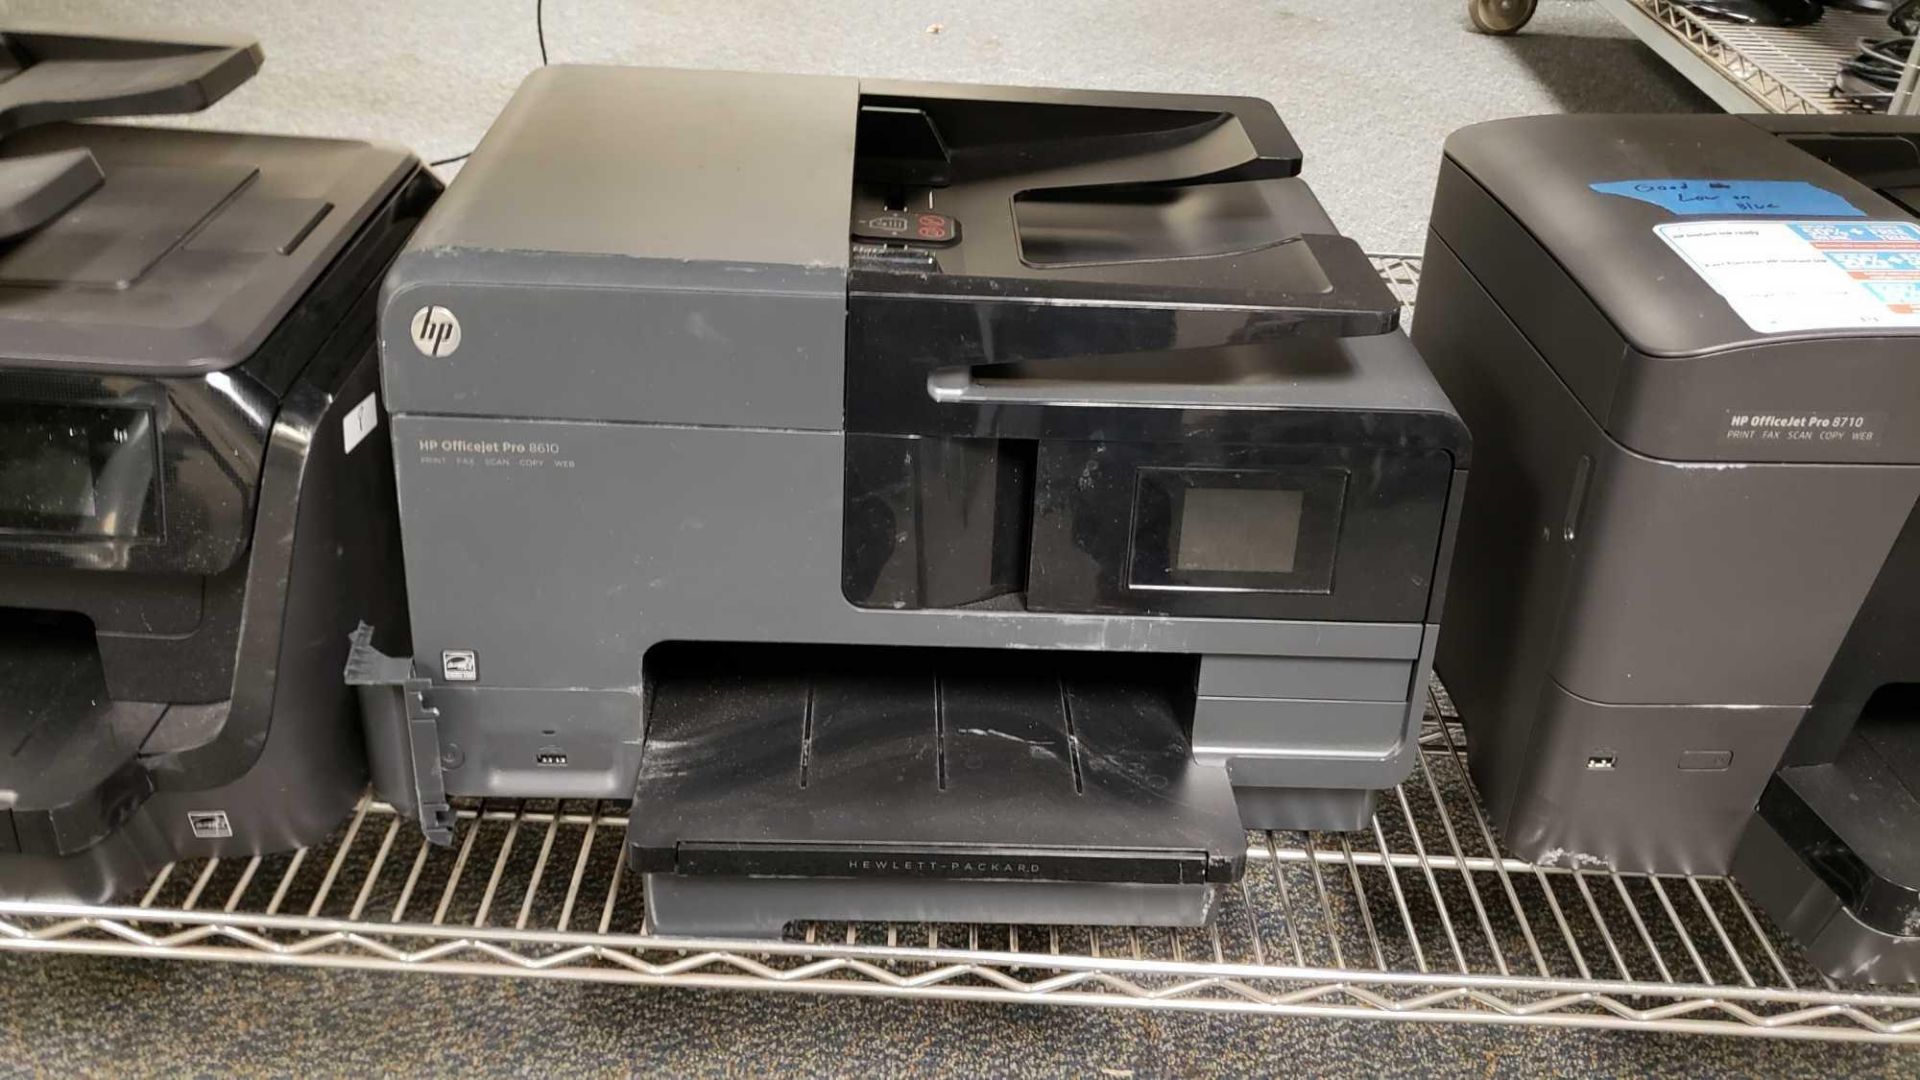 Lot of (3) HP Printers to include (2) HP Officejet Pro 8710 and (1) HP Officejet Pro 8610 - Image 3 of 4